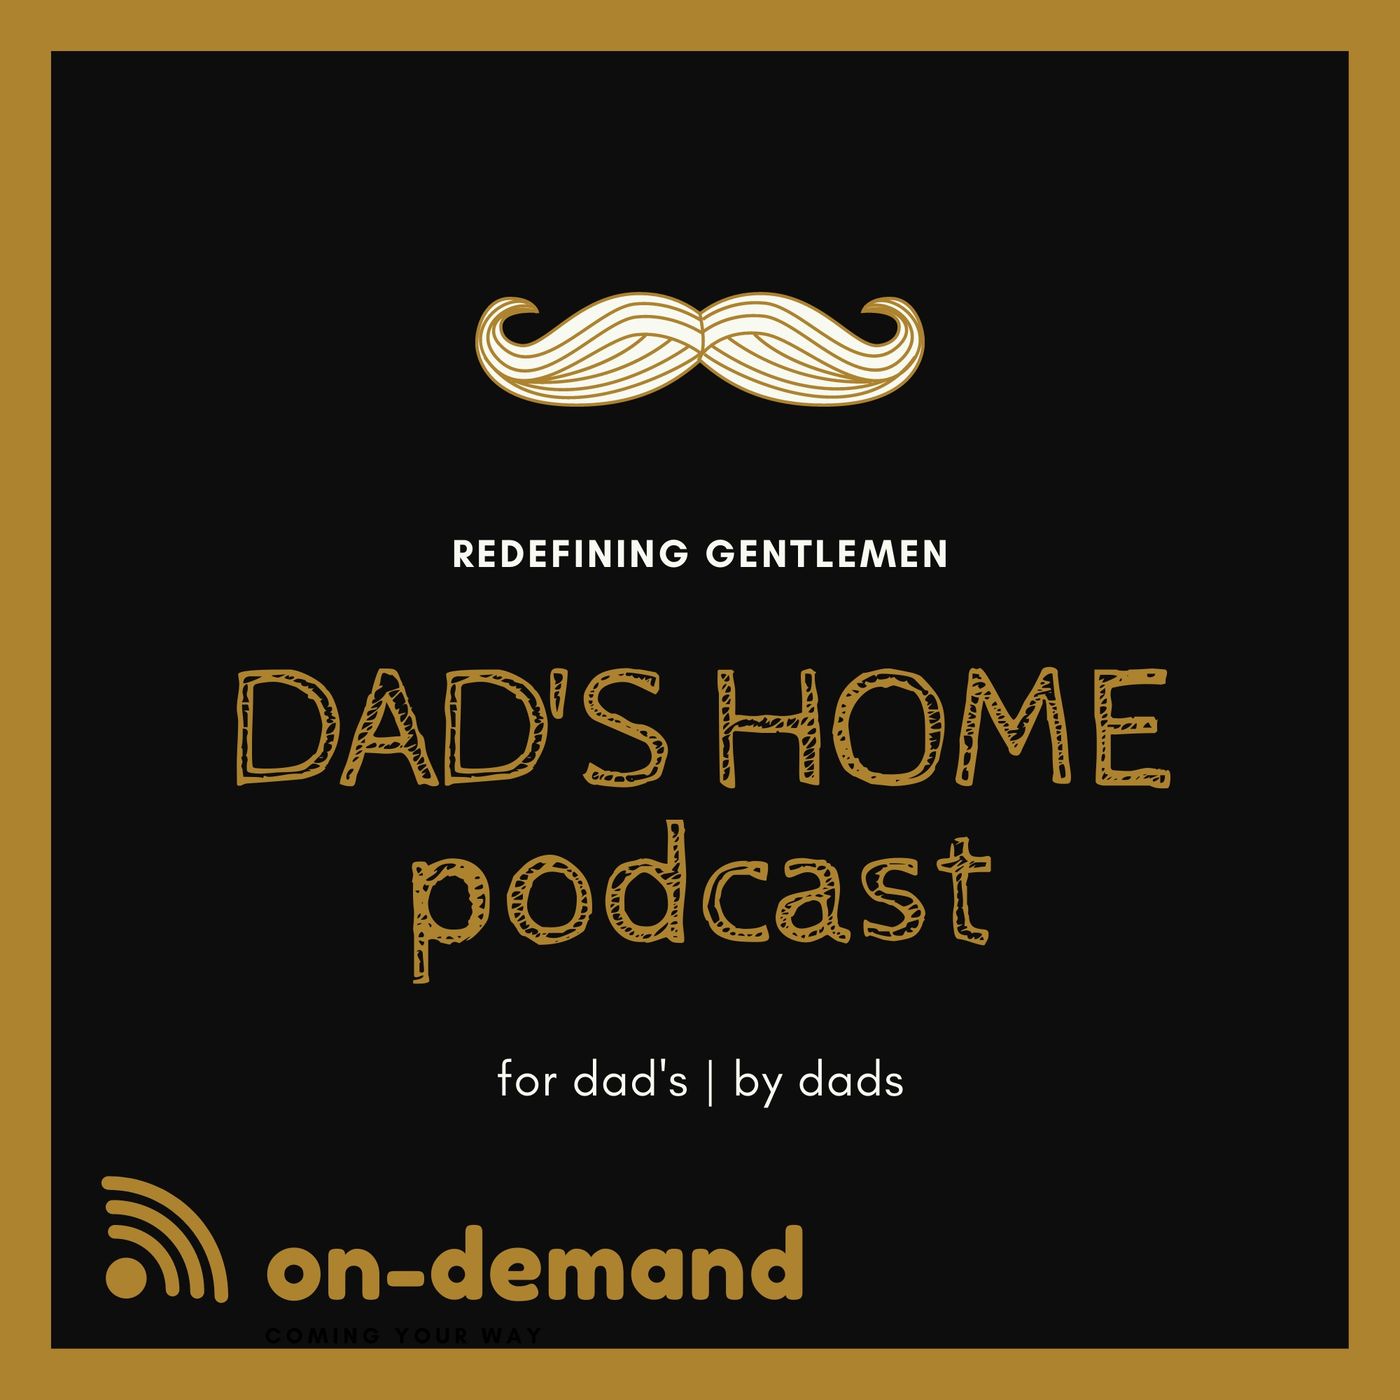 Dads Home Podcast | Season 002 - Episode #202 | "Snapping Turtle" | NSFW